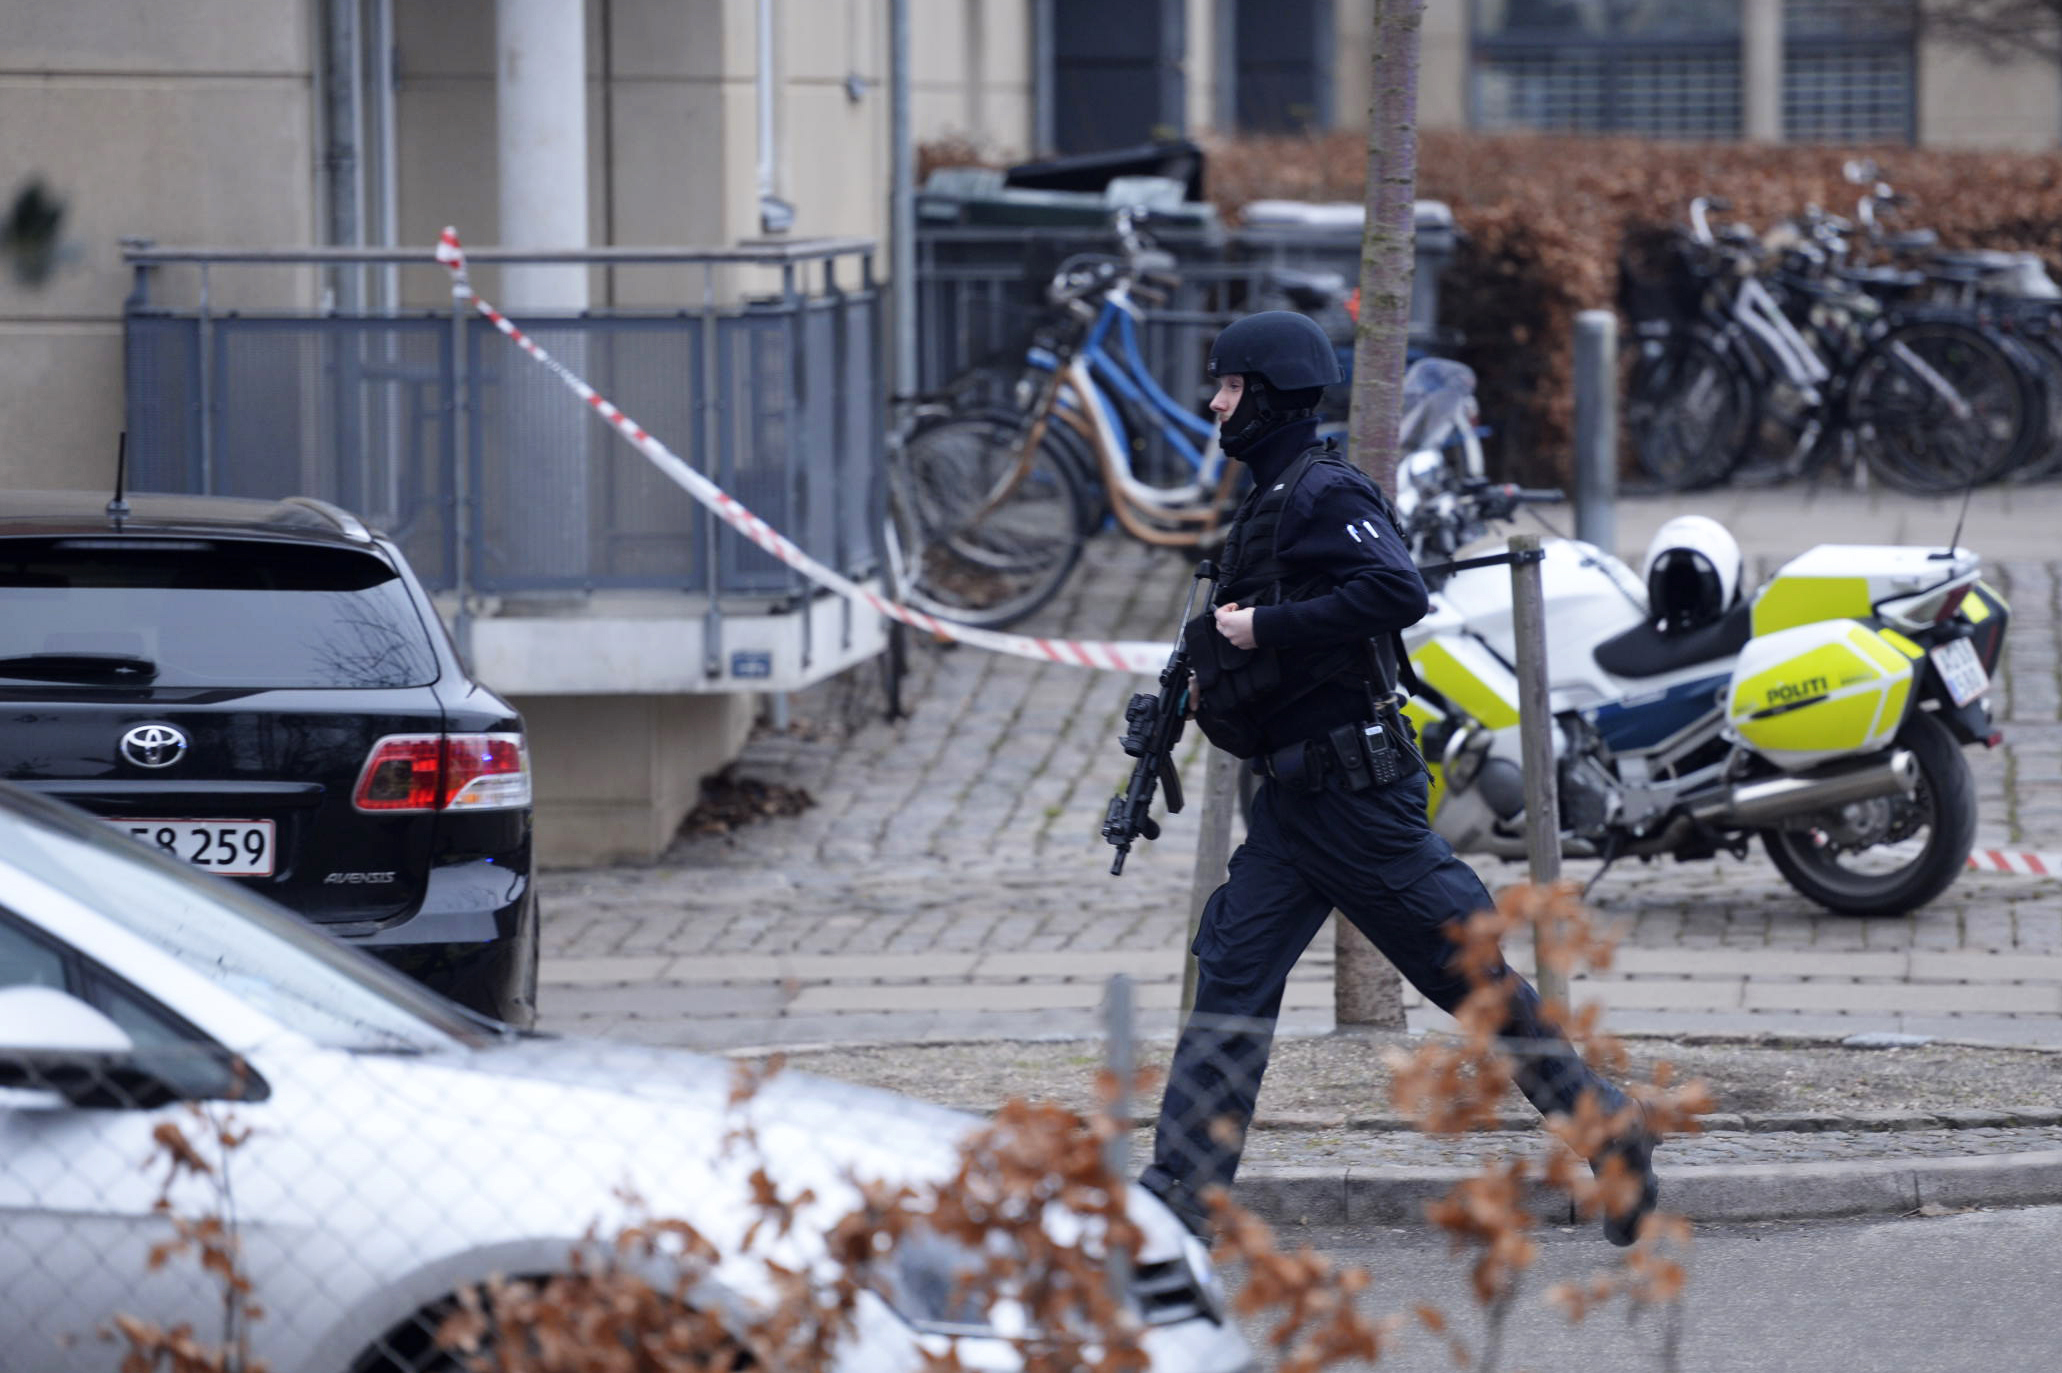 An armed security officer runs down a street near a venue after shots were fired where an event titled  "Art, blasphemy and the freedom of expression" was being held in Copenhagen, Saturday, Feb. 14, 2015. (Kenneth Meyer—AP)